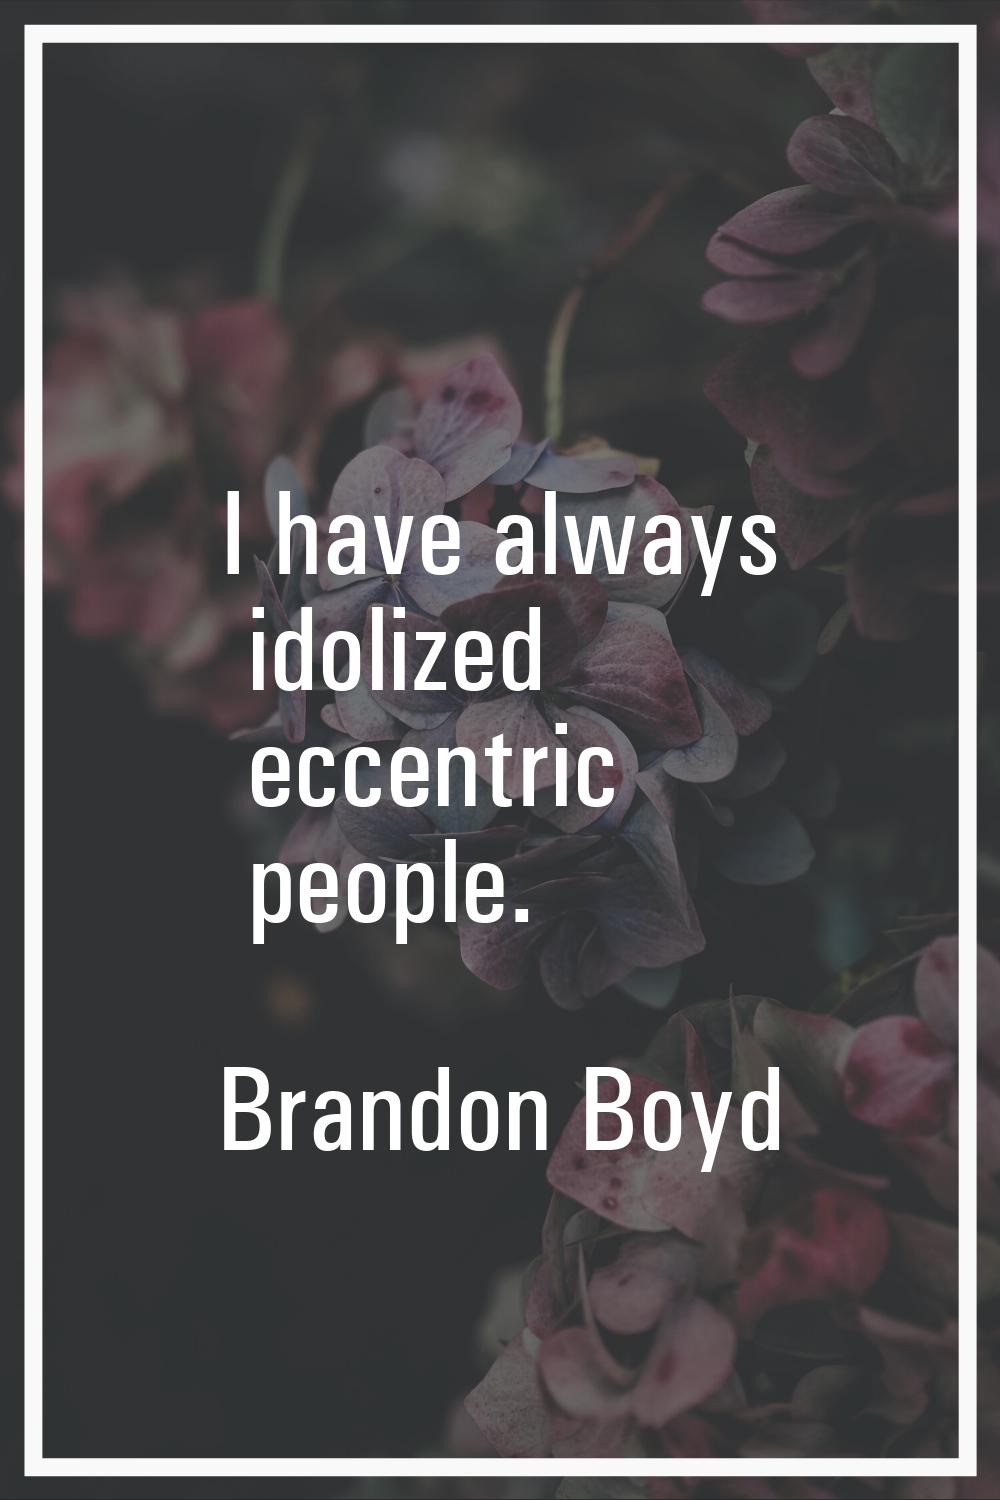 I have always idolized eccentric people.